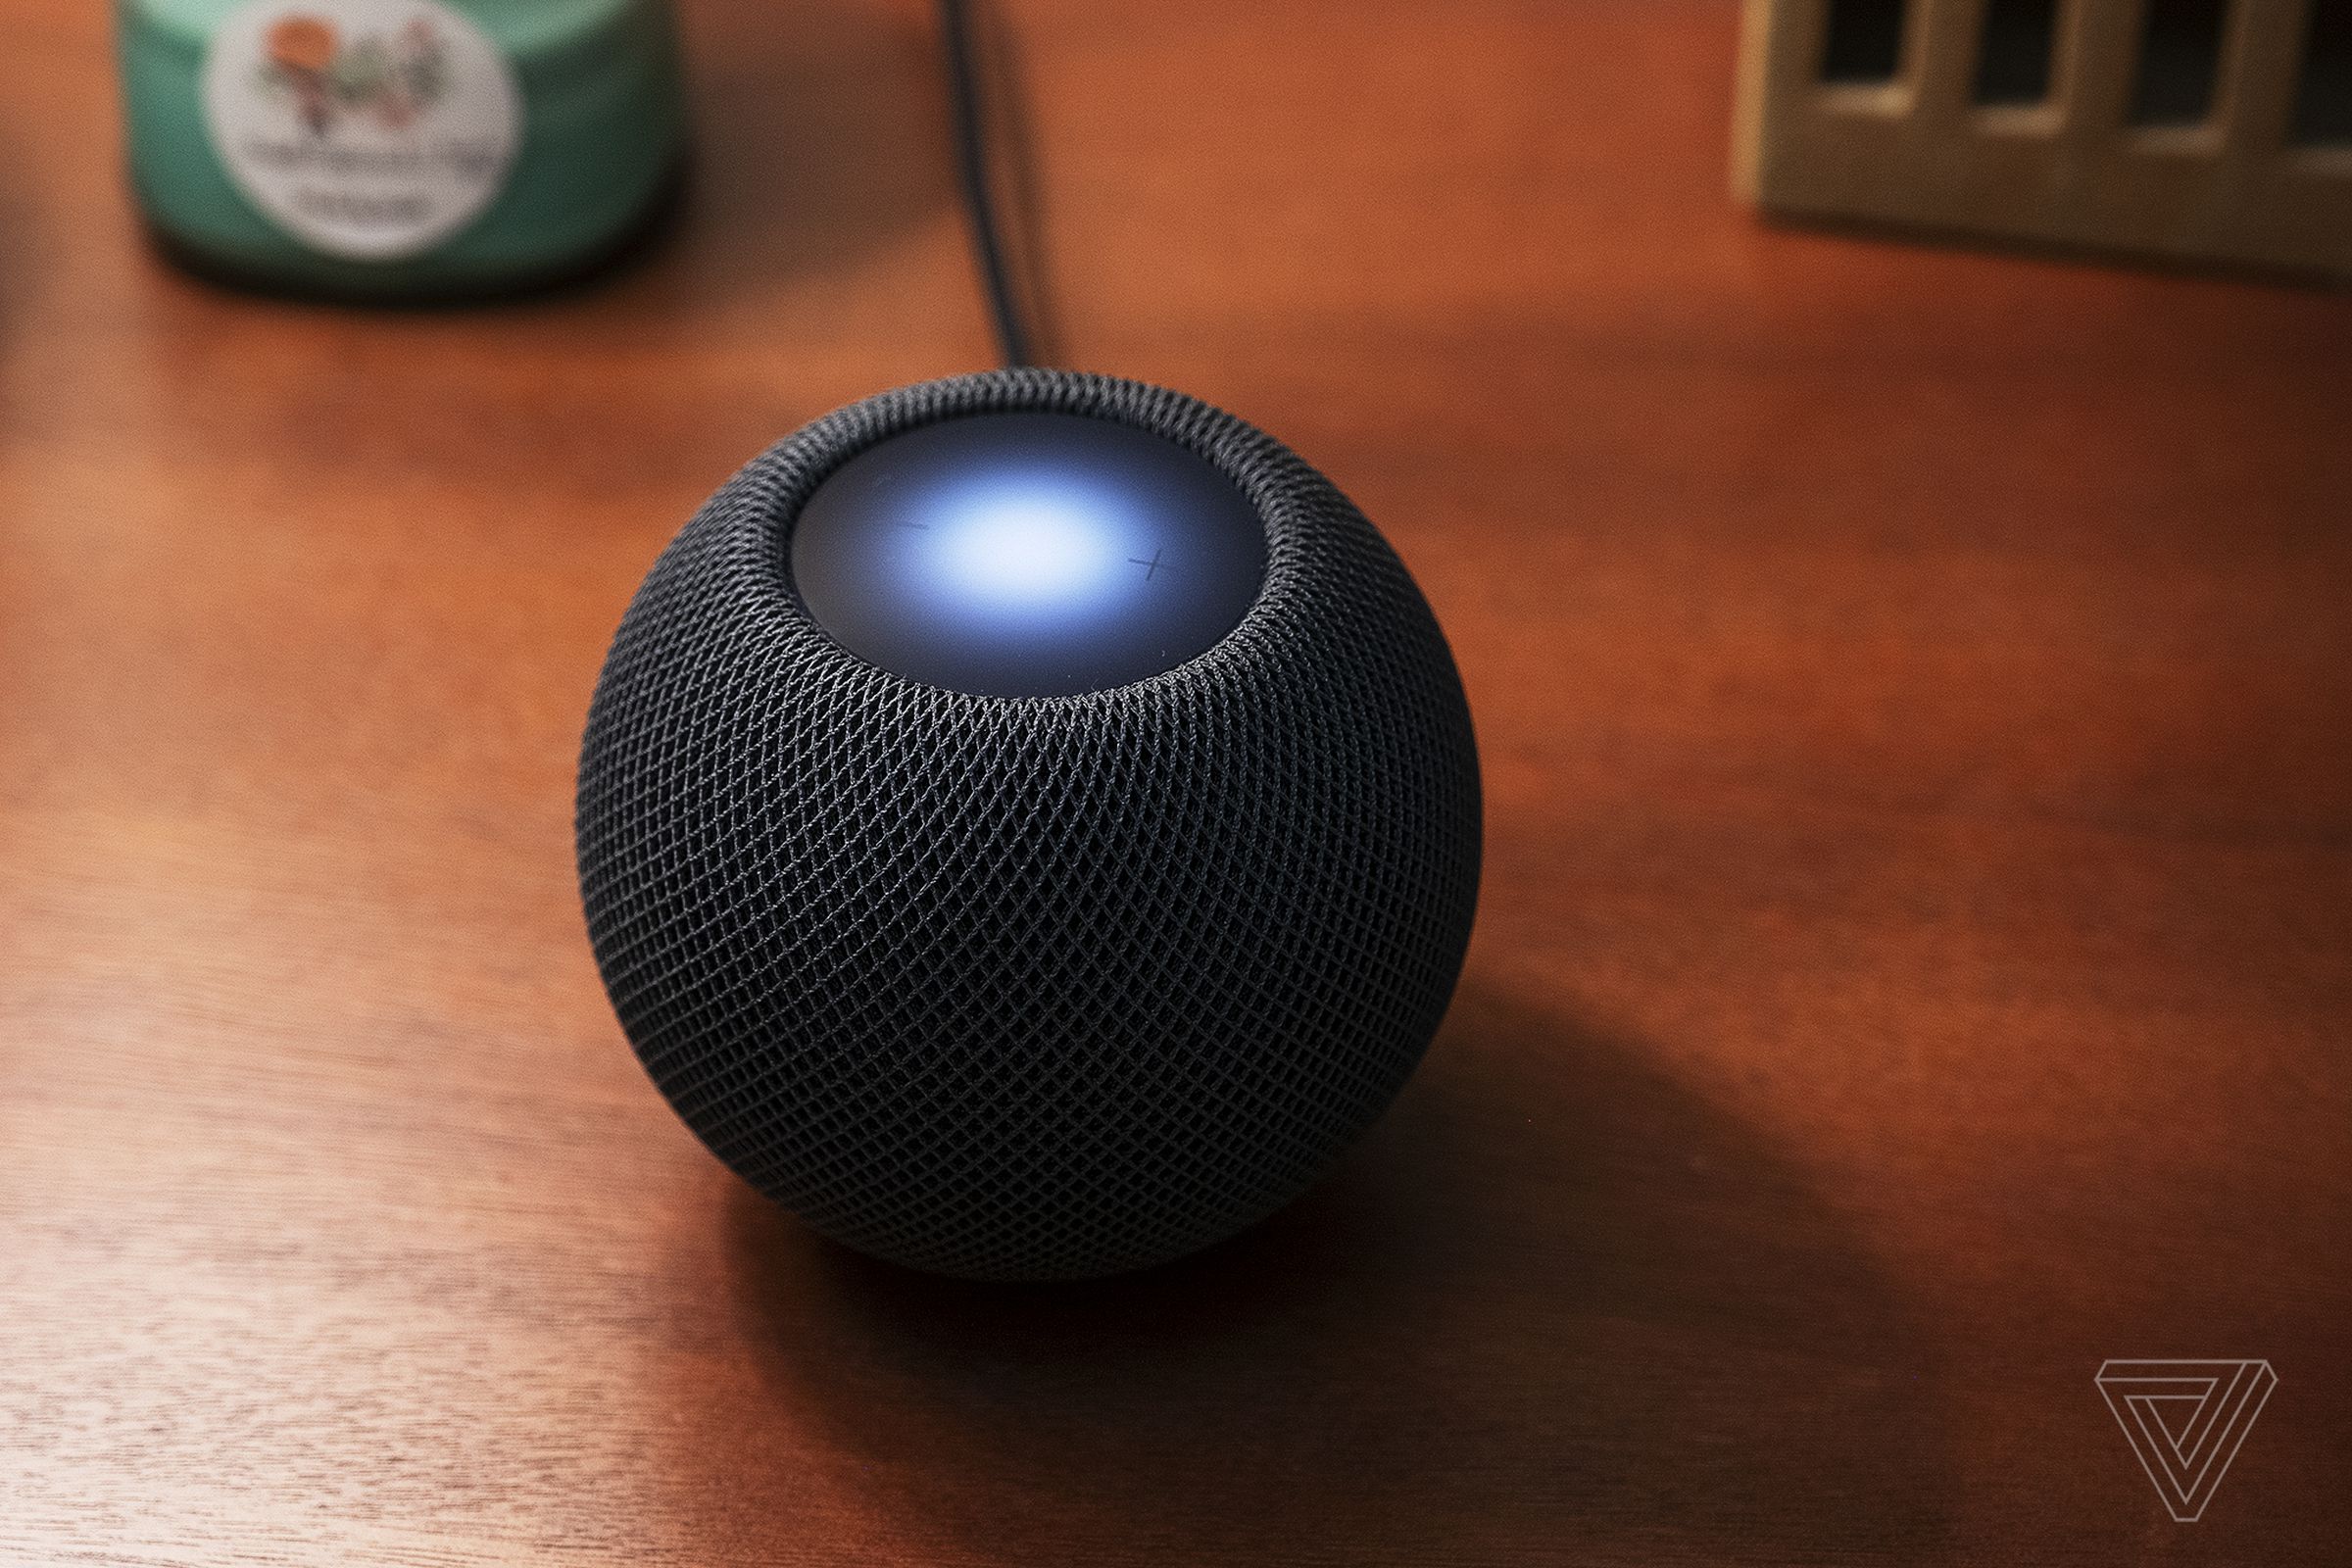 The HomePod mini sounds good for its size.